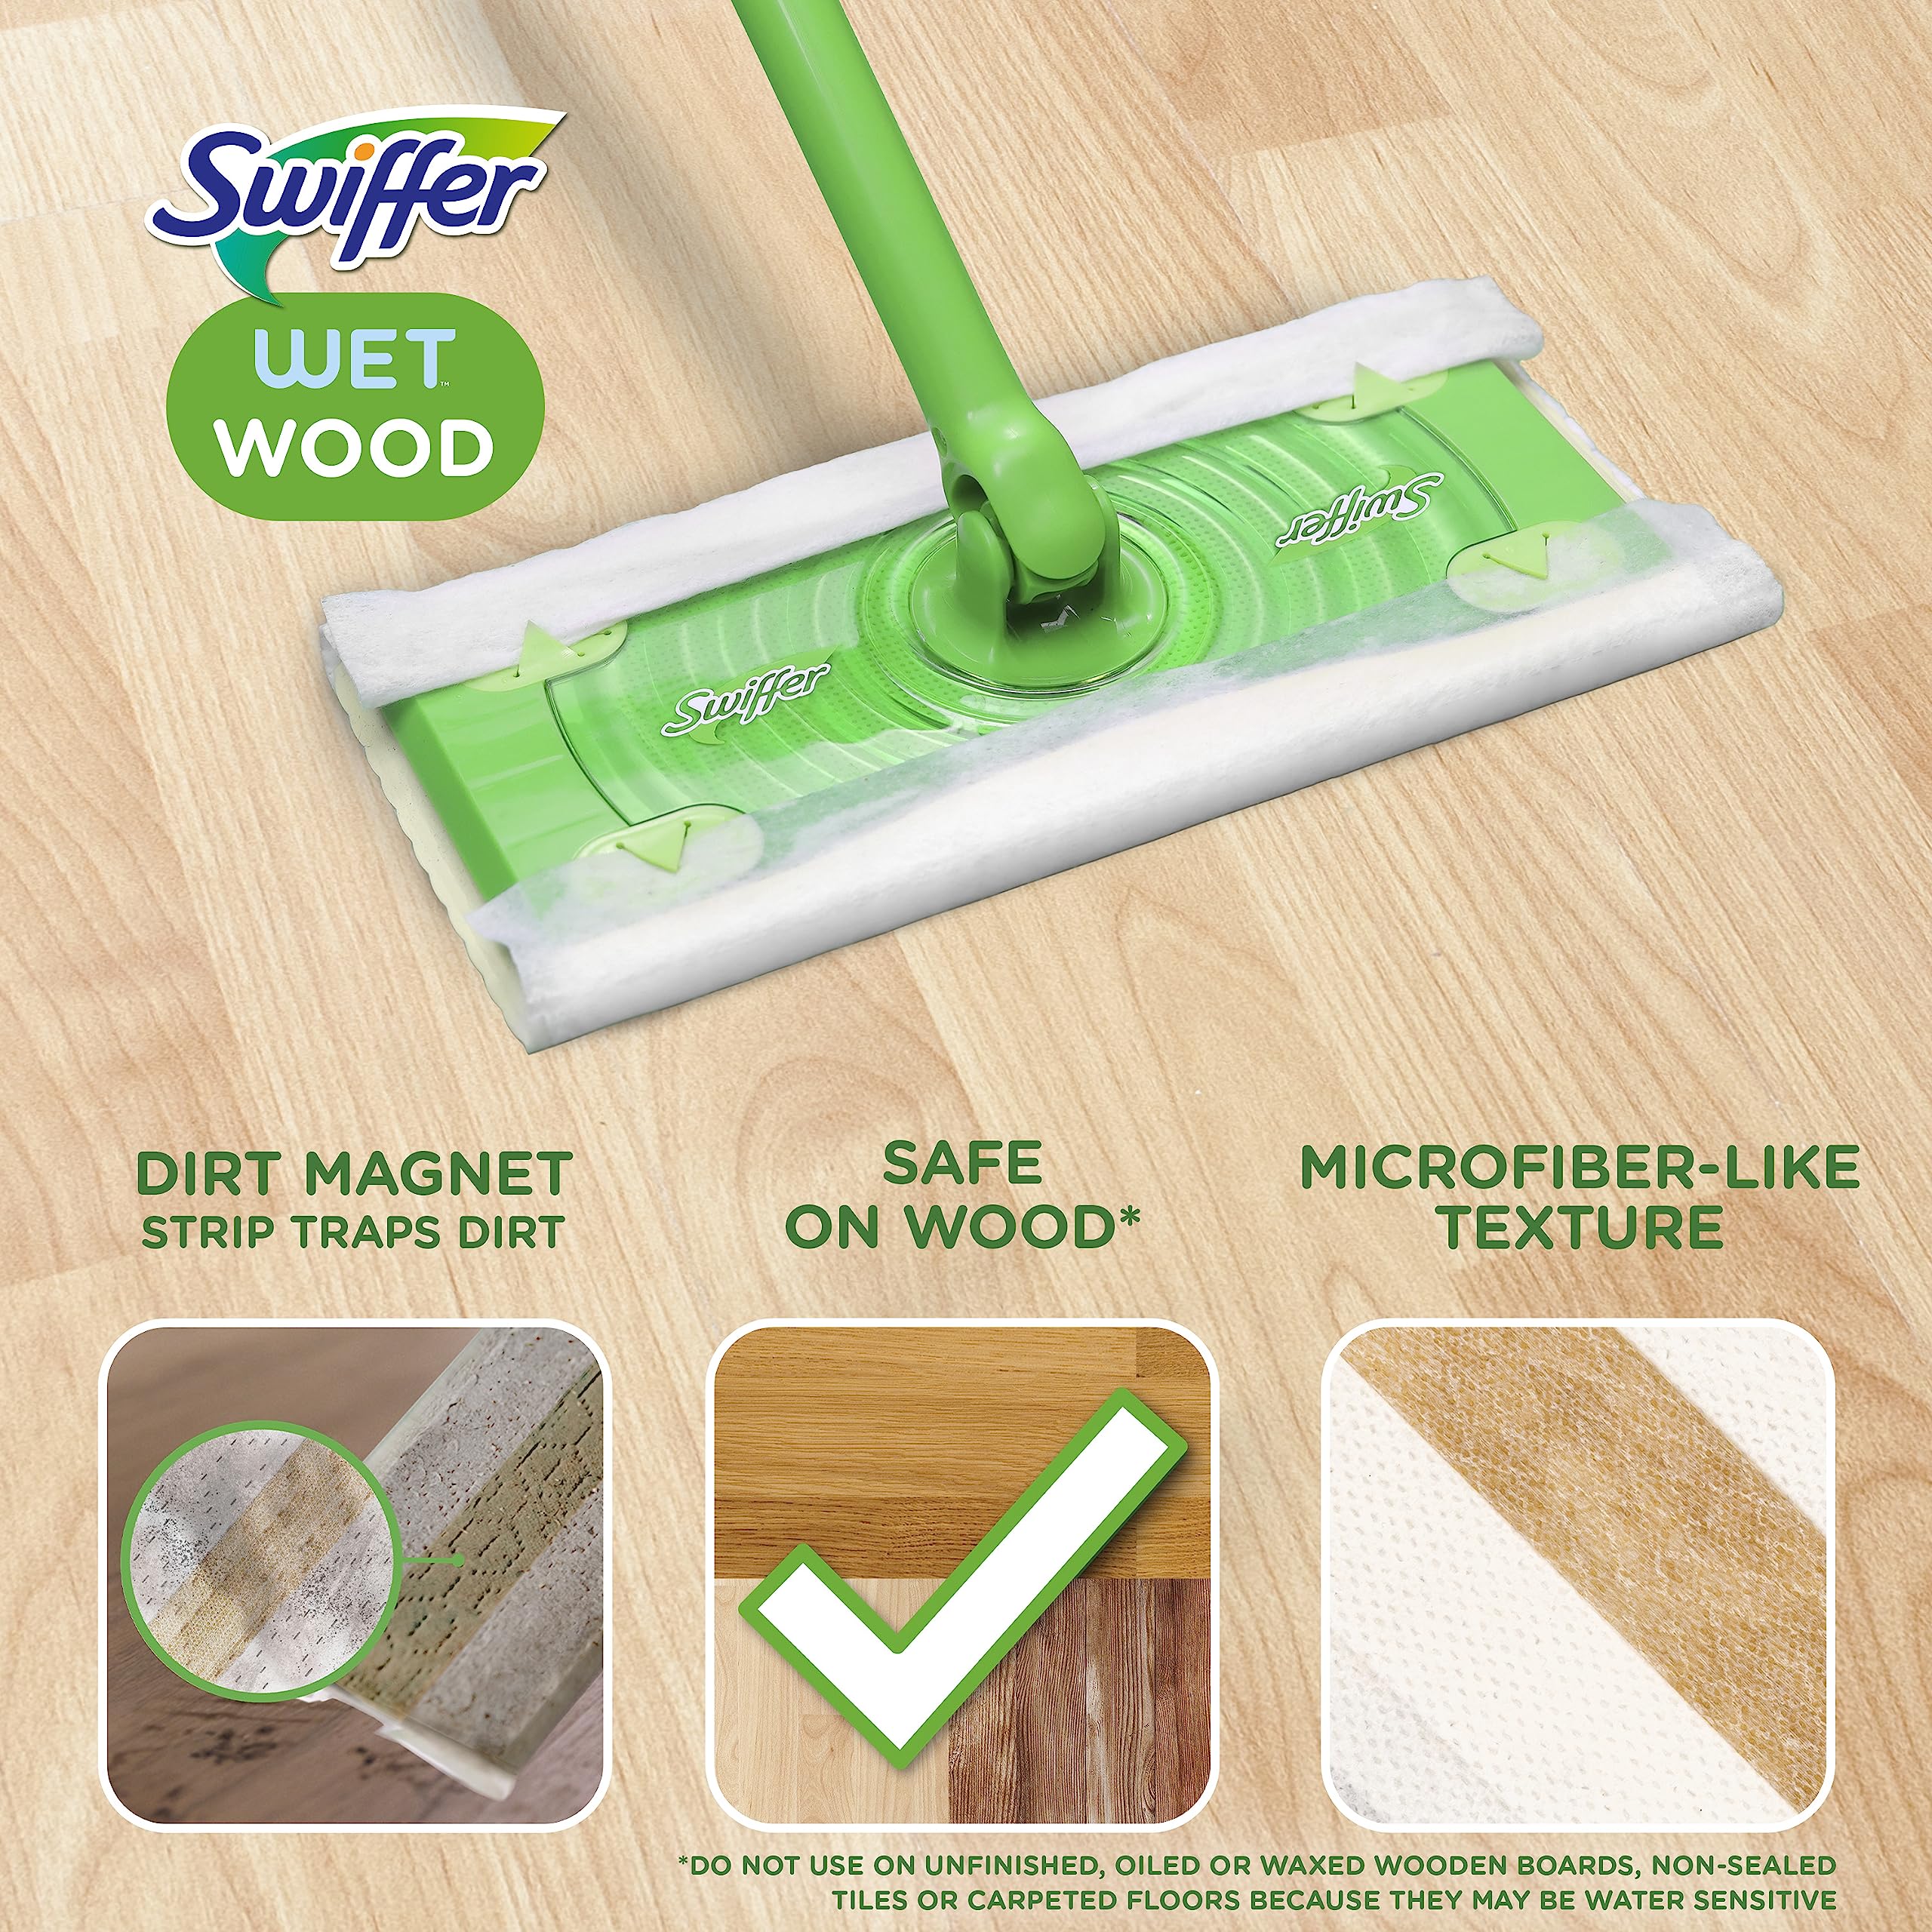 Swiffer Sweeper Wet Wood Floor Mopping cloths, 20 count